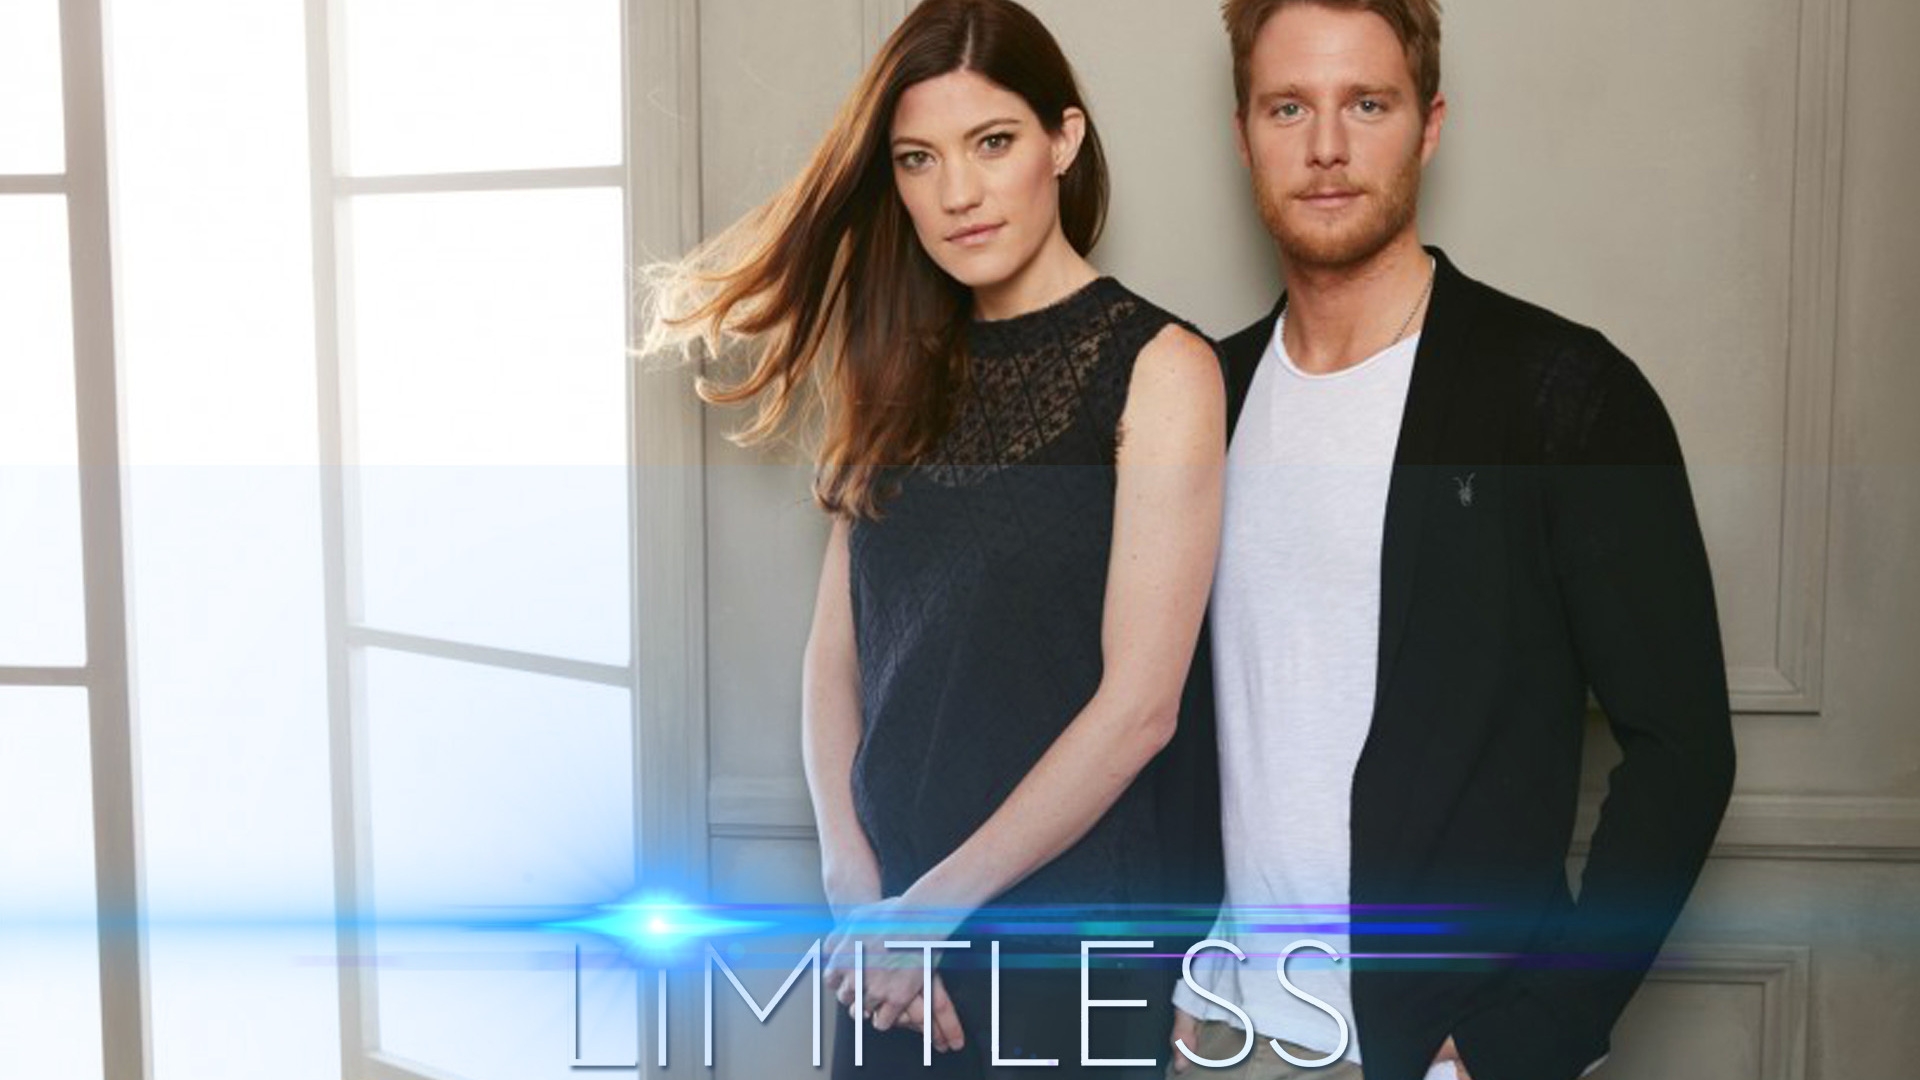 Limitless Cast for 1920 x 1080 HDTV 1080p resolution